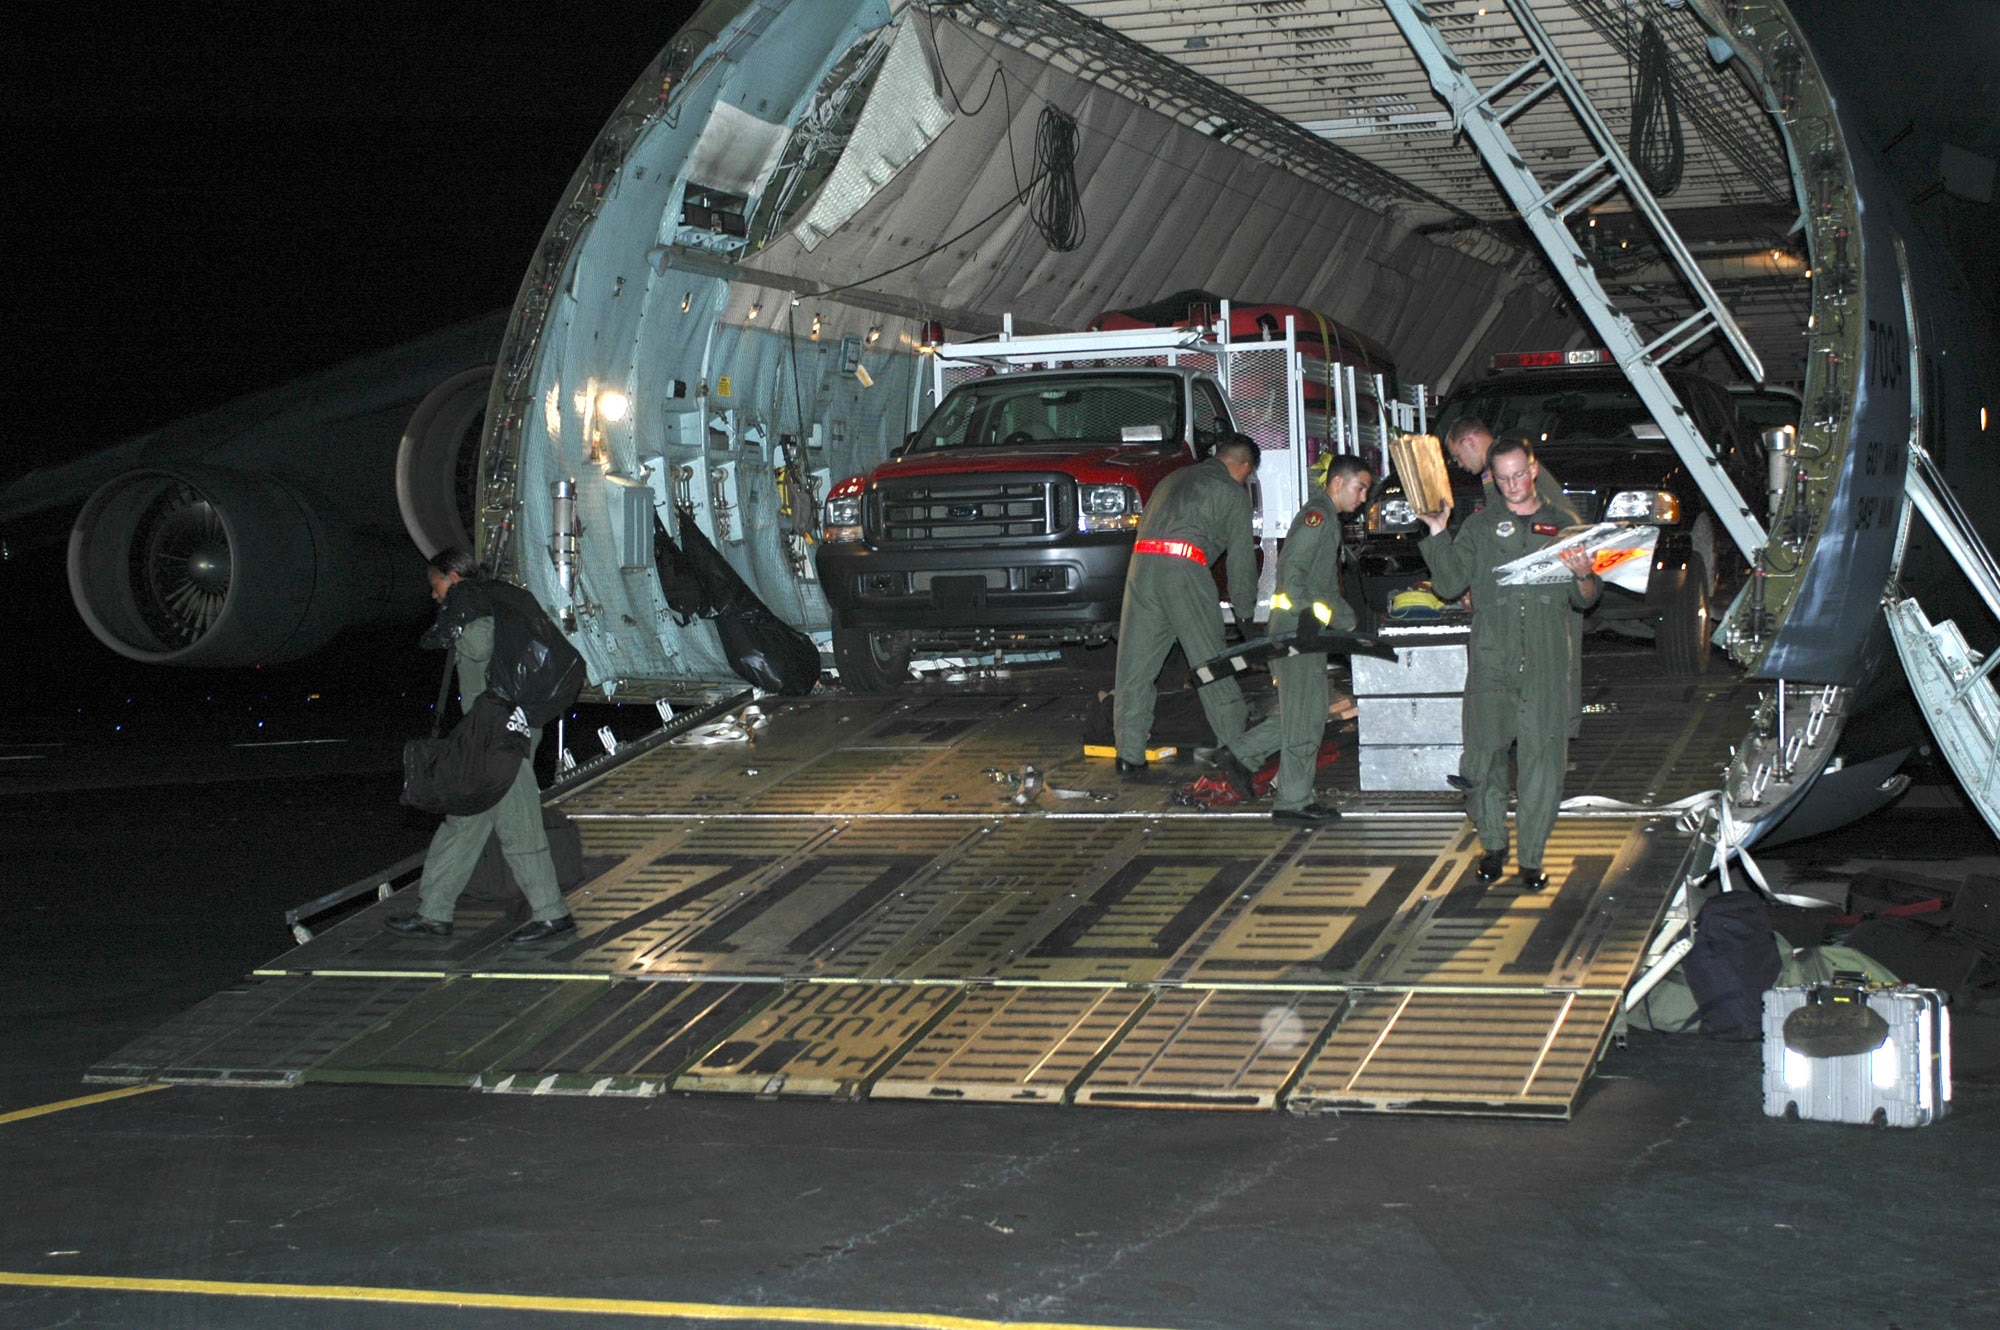 Airmen are unloading an emergency vehicle off of a C-5, which is a very large aircraft.